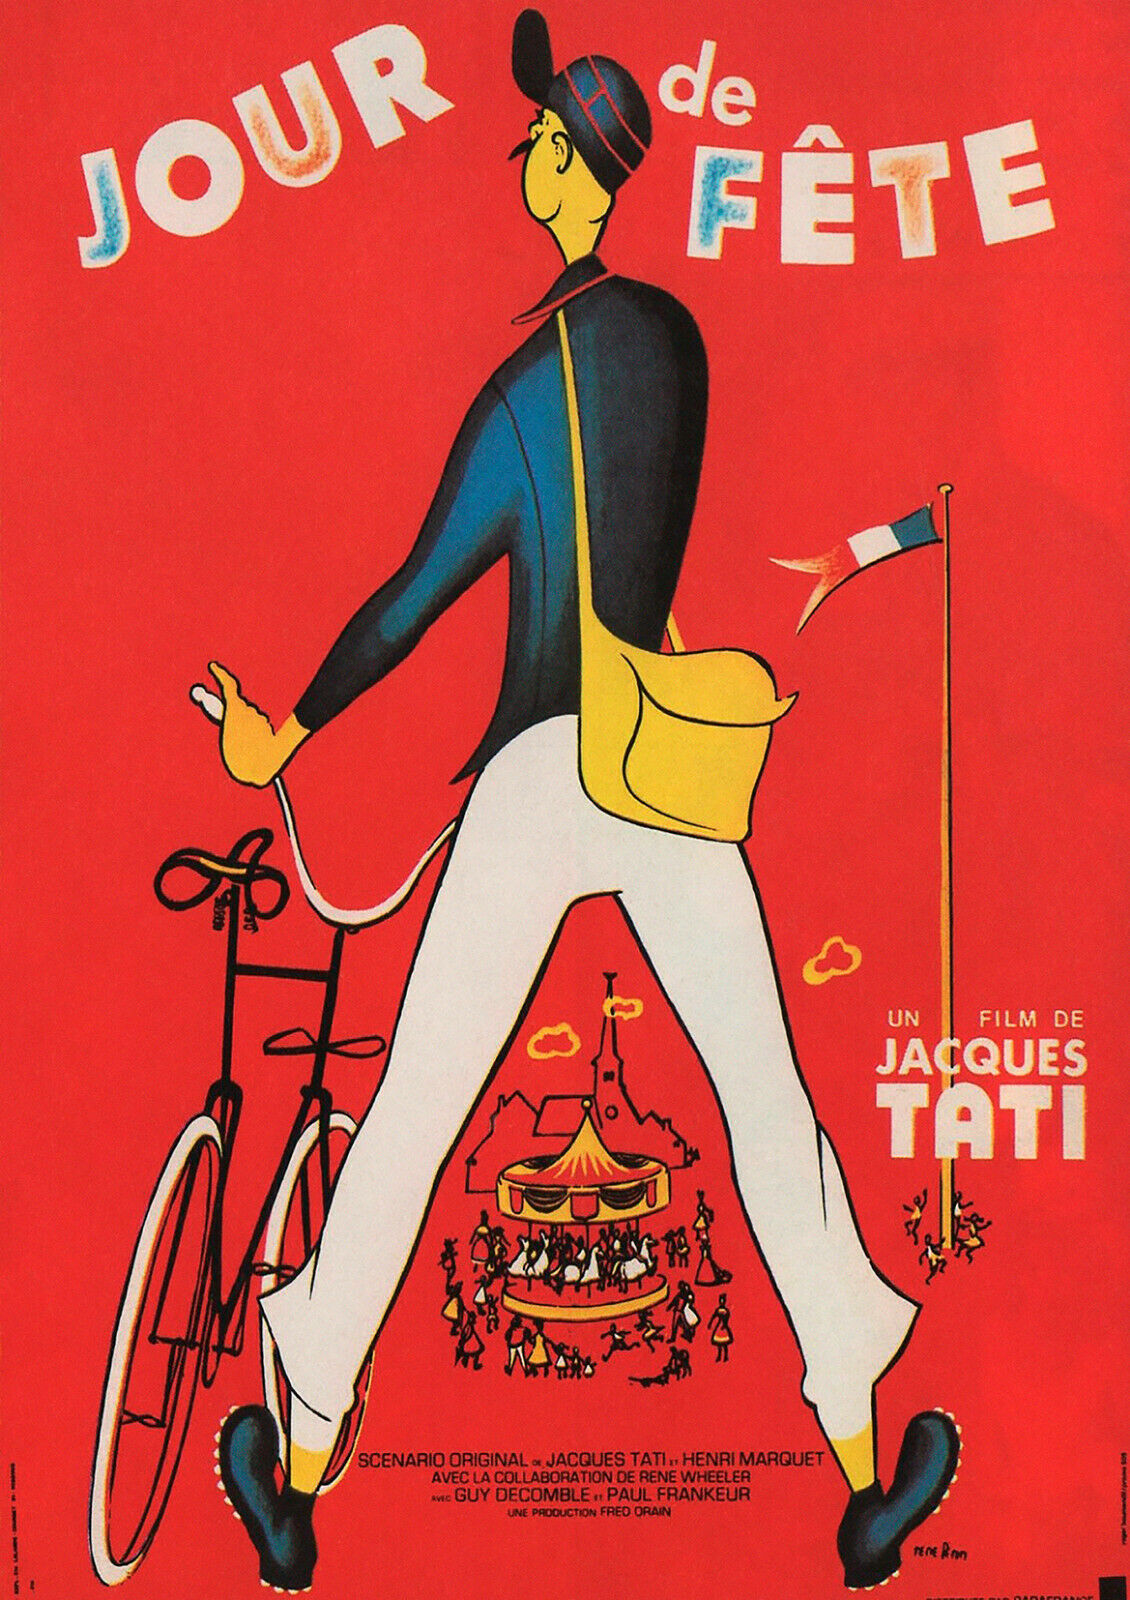 Jacques Tati - Set of 3 - A3 - iconic film posters - Mon Oncle, Jour de fete, Trafic - Film Poster - French mime, filmmaker, actor, and screenwriter